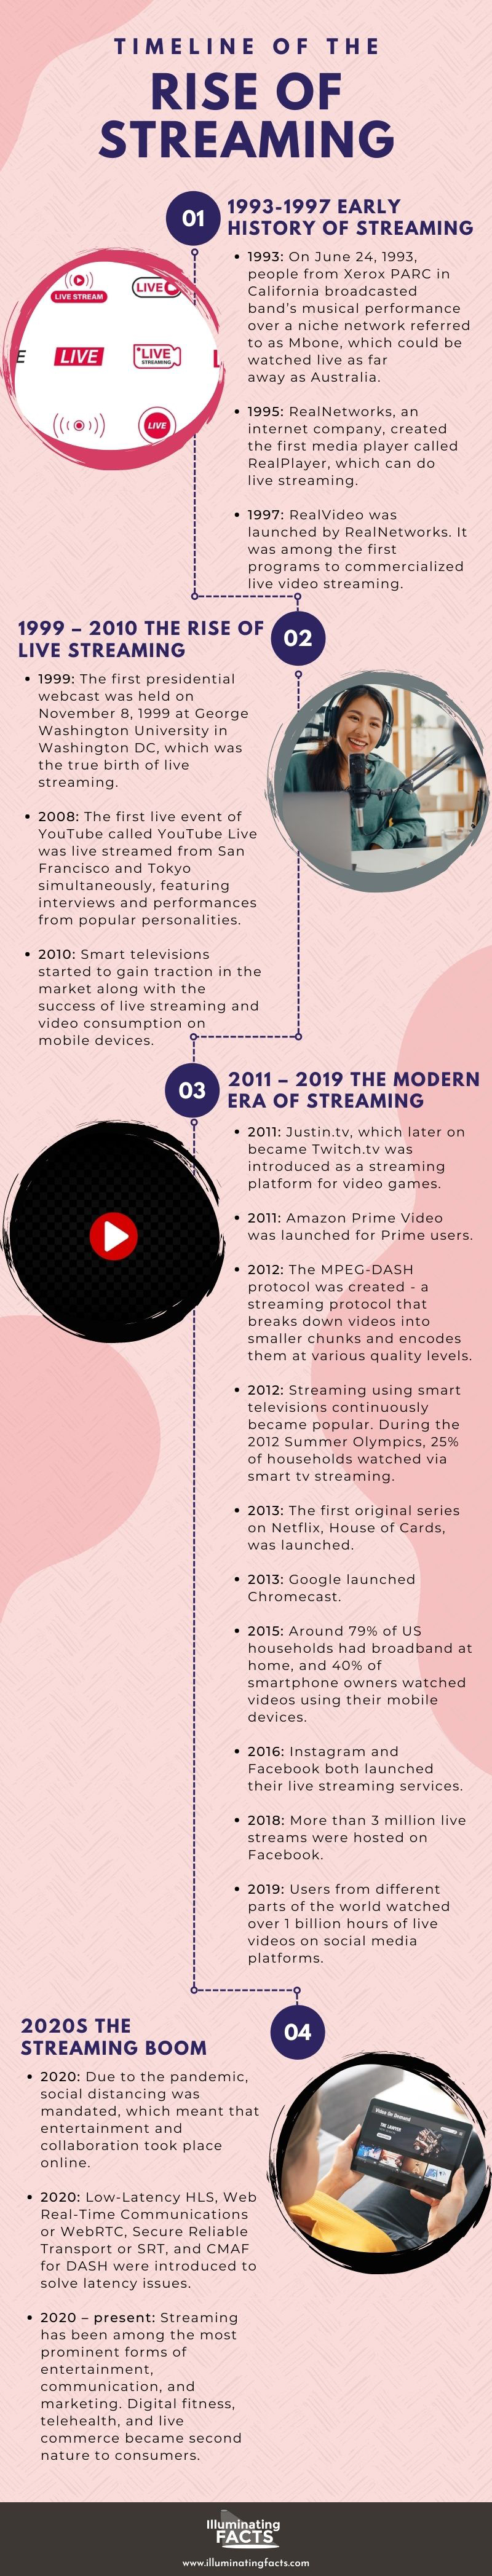 Timeline of the Rise of Streaming